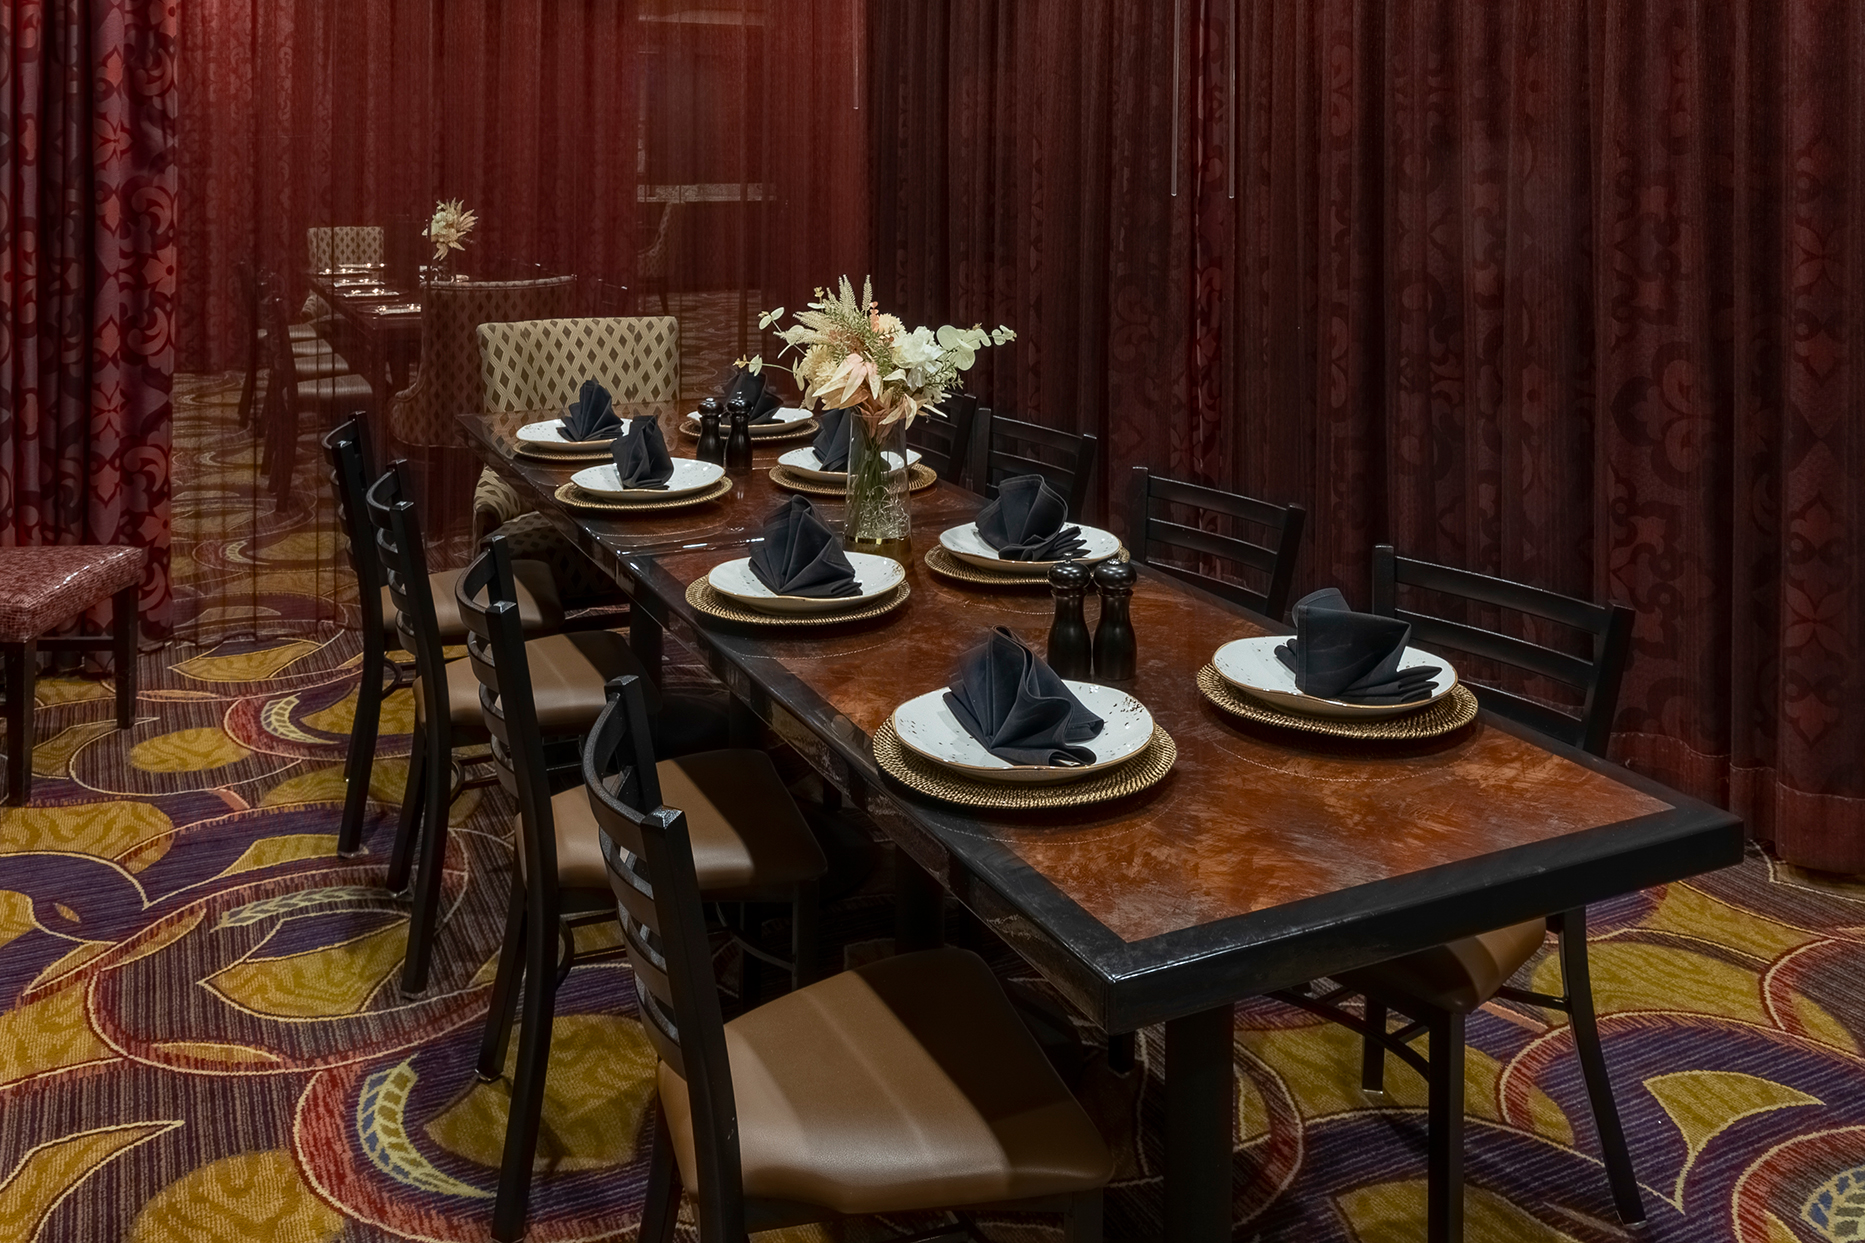 Private Dining Room A